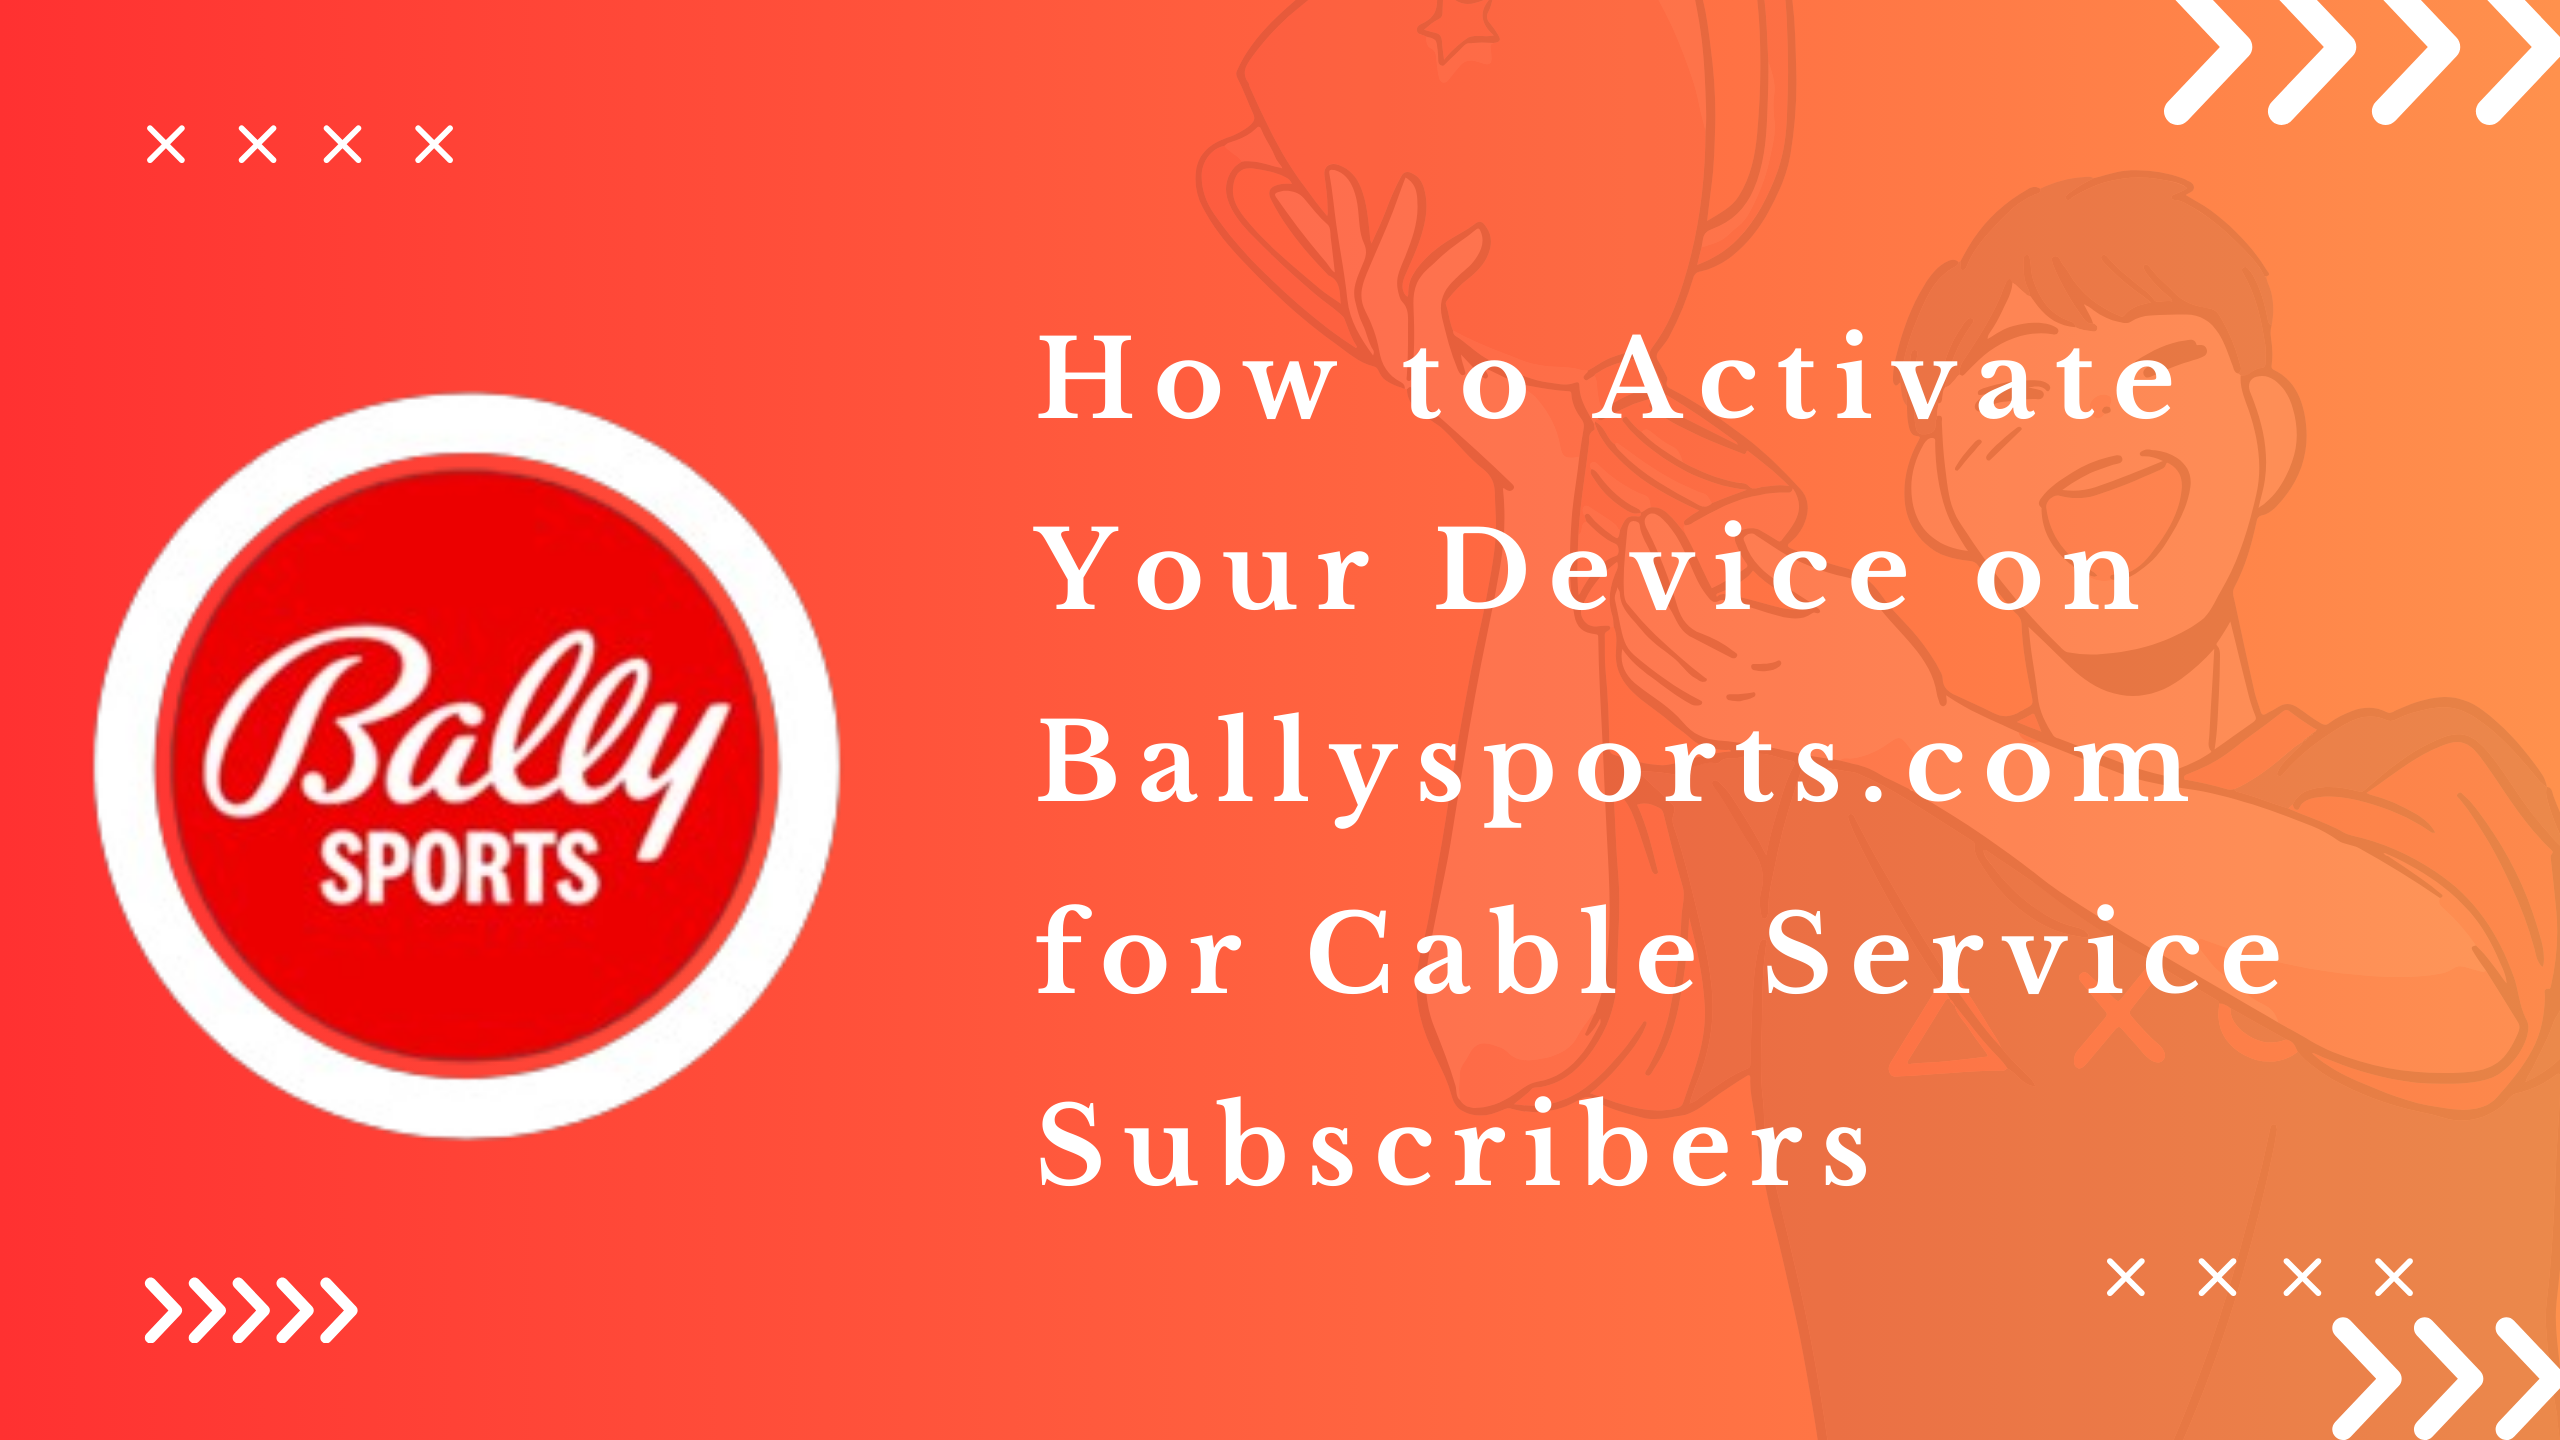 How to Activate Your Device on Ballysports.com for Cable Service Subscribers: